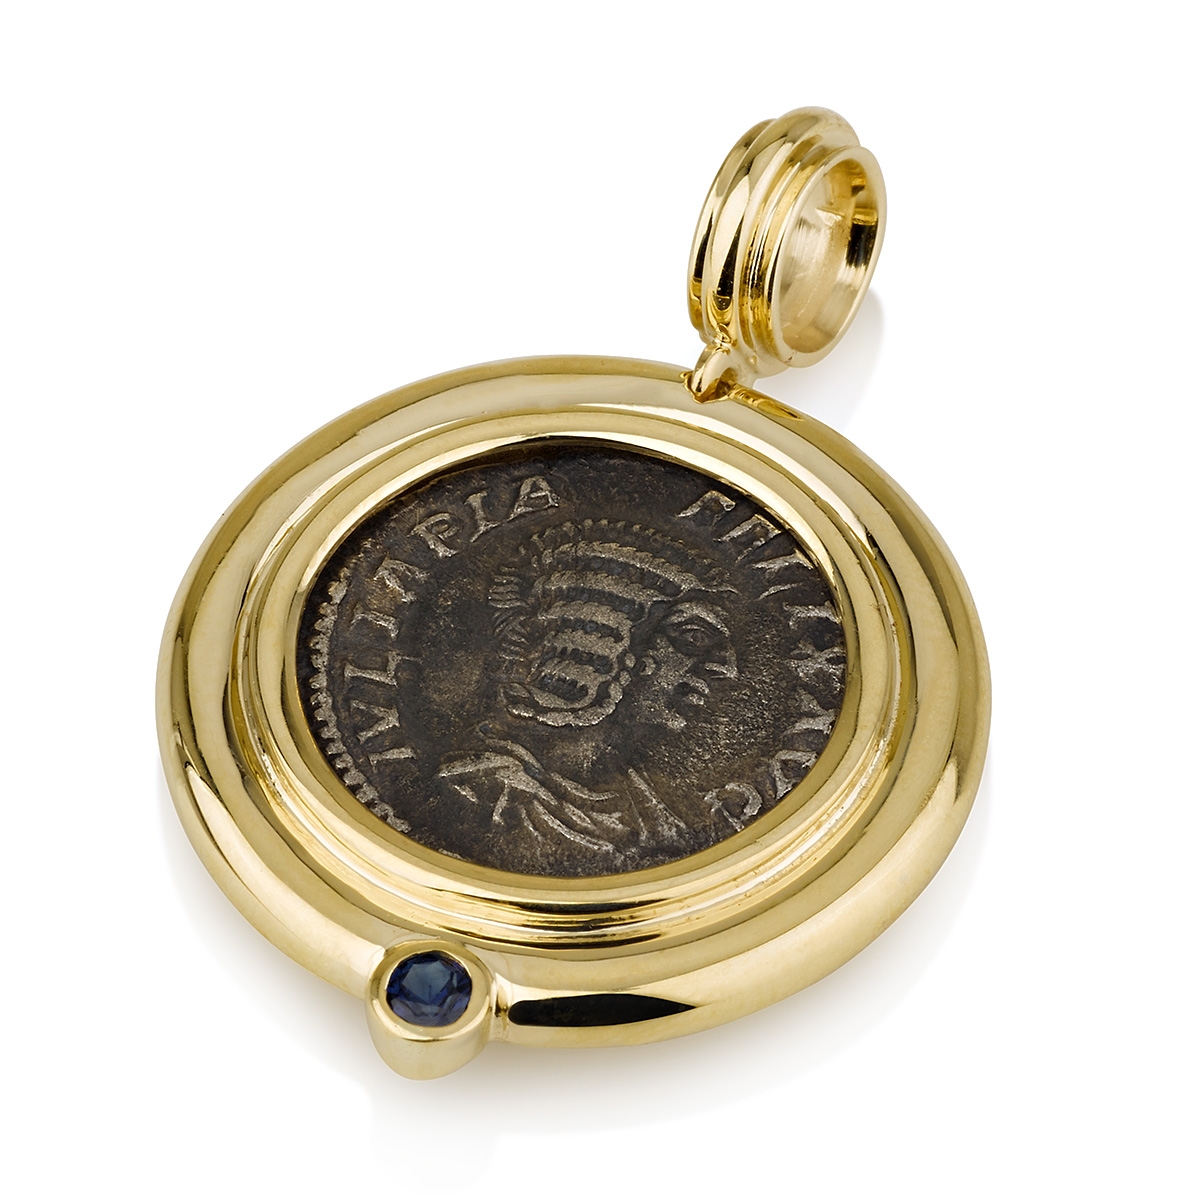 Ben Jewelry 14K Gold and Sapphire Pendant with Ancient Roman Coin Empress Julia Domna AD 160-217 - 1